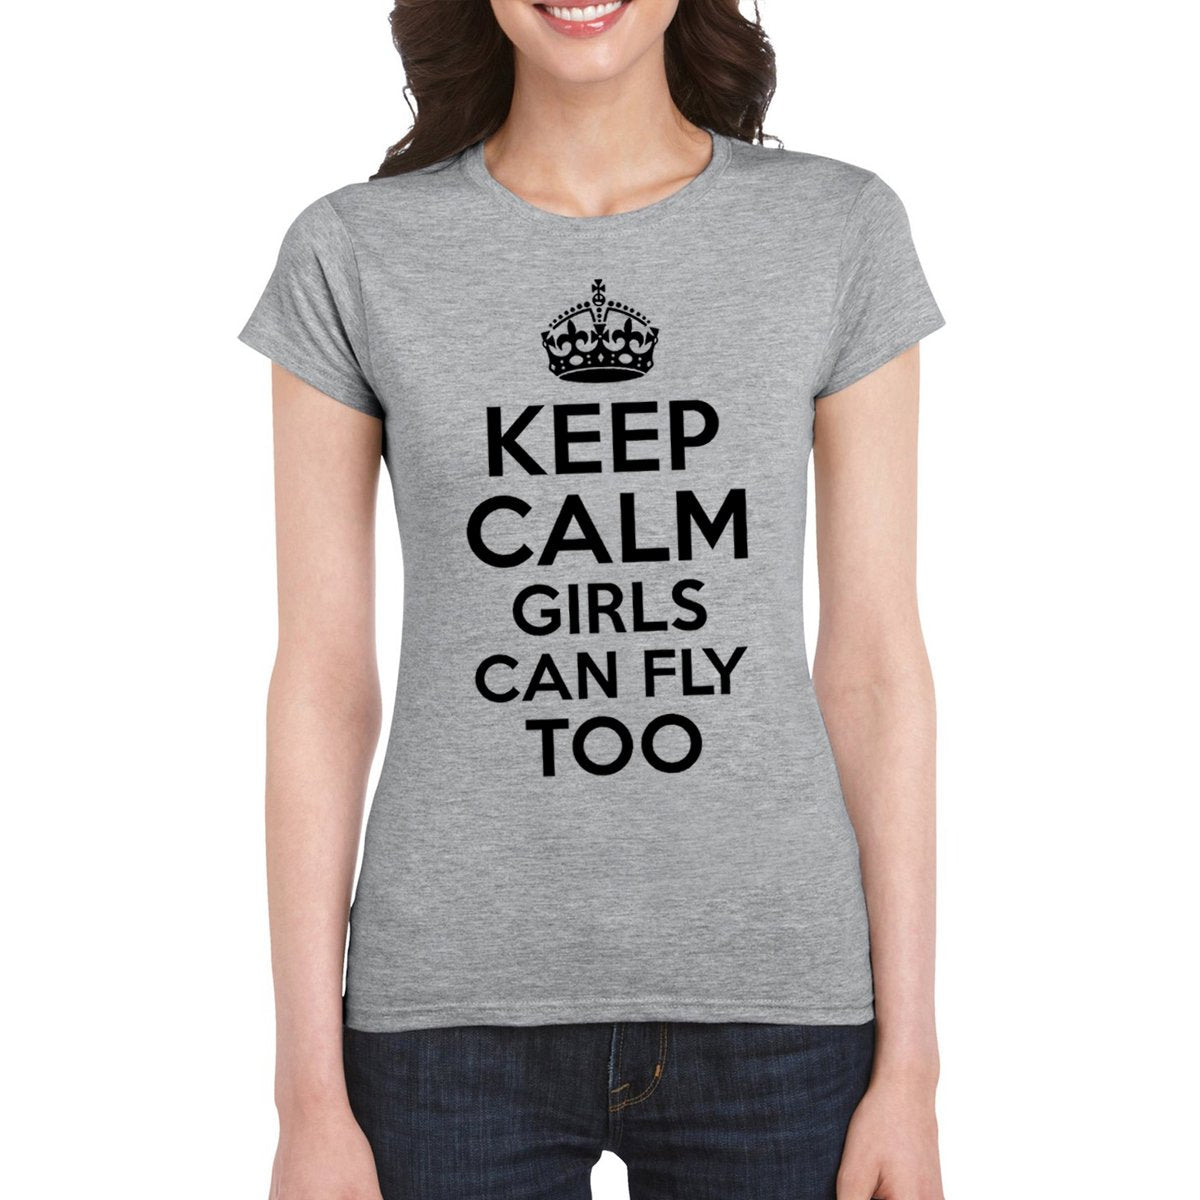 KEEP CALM Girls Can Fly Too Women's Crew Semi-Fitted T-Shirt